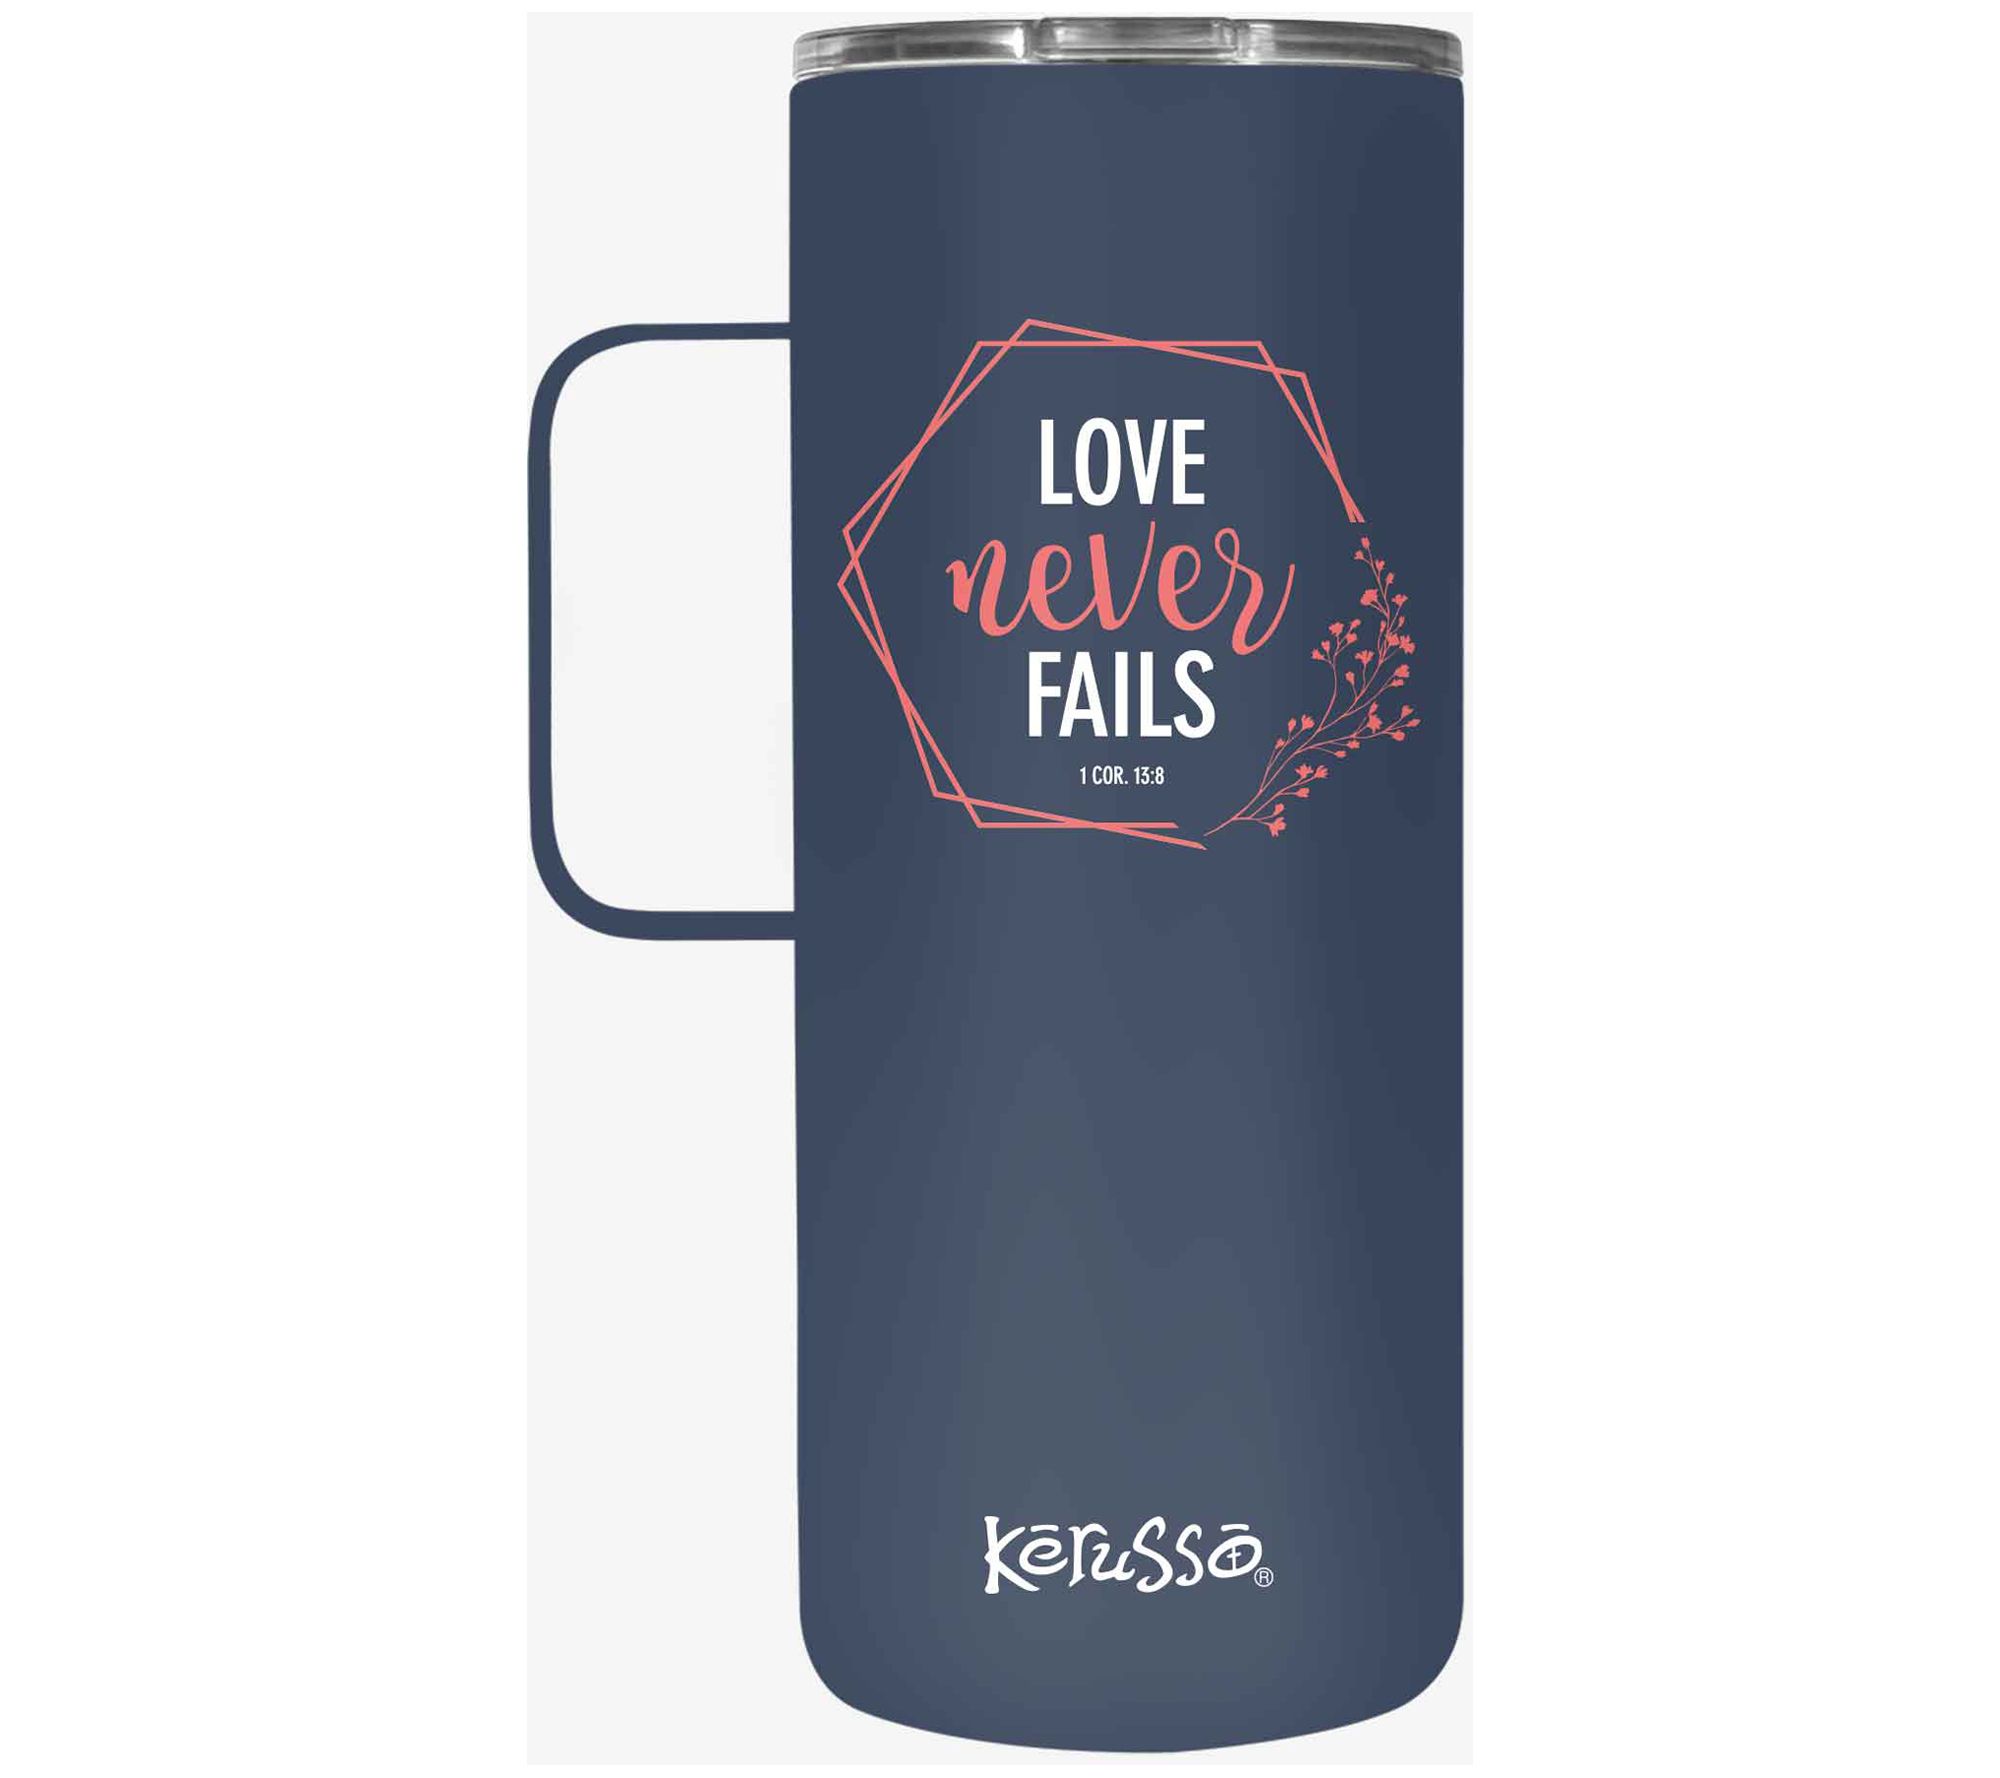 Water Bottle Holder With Strap, Coffee Craver Travel Mug Tote